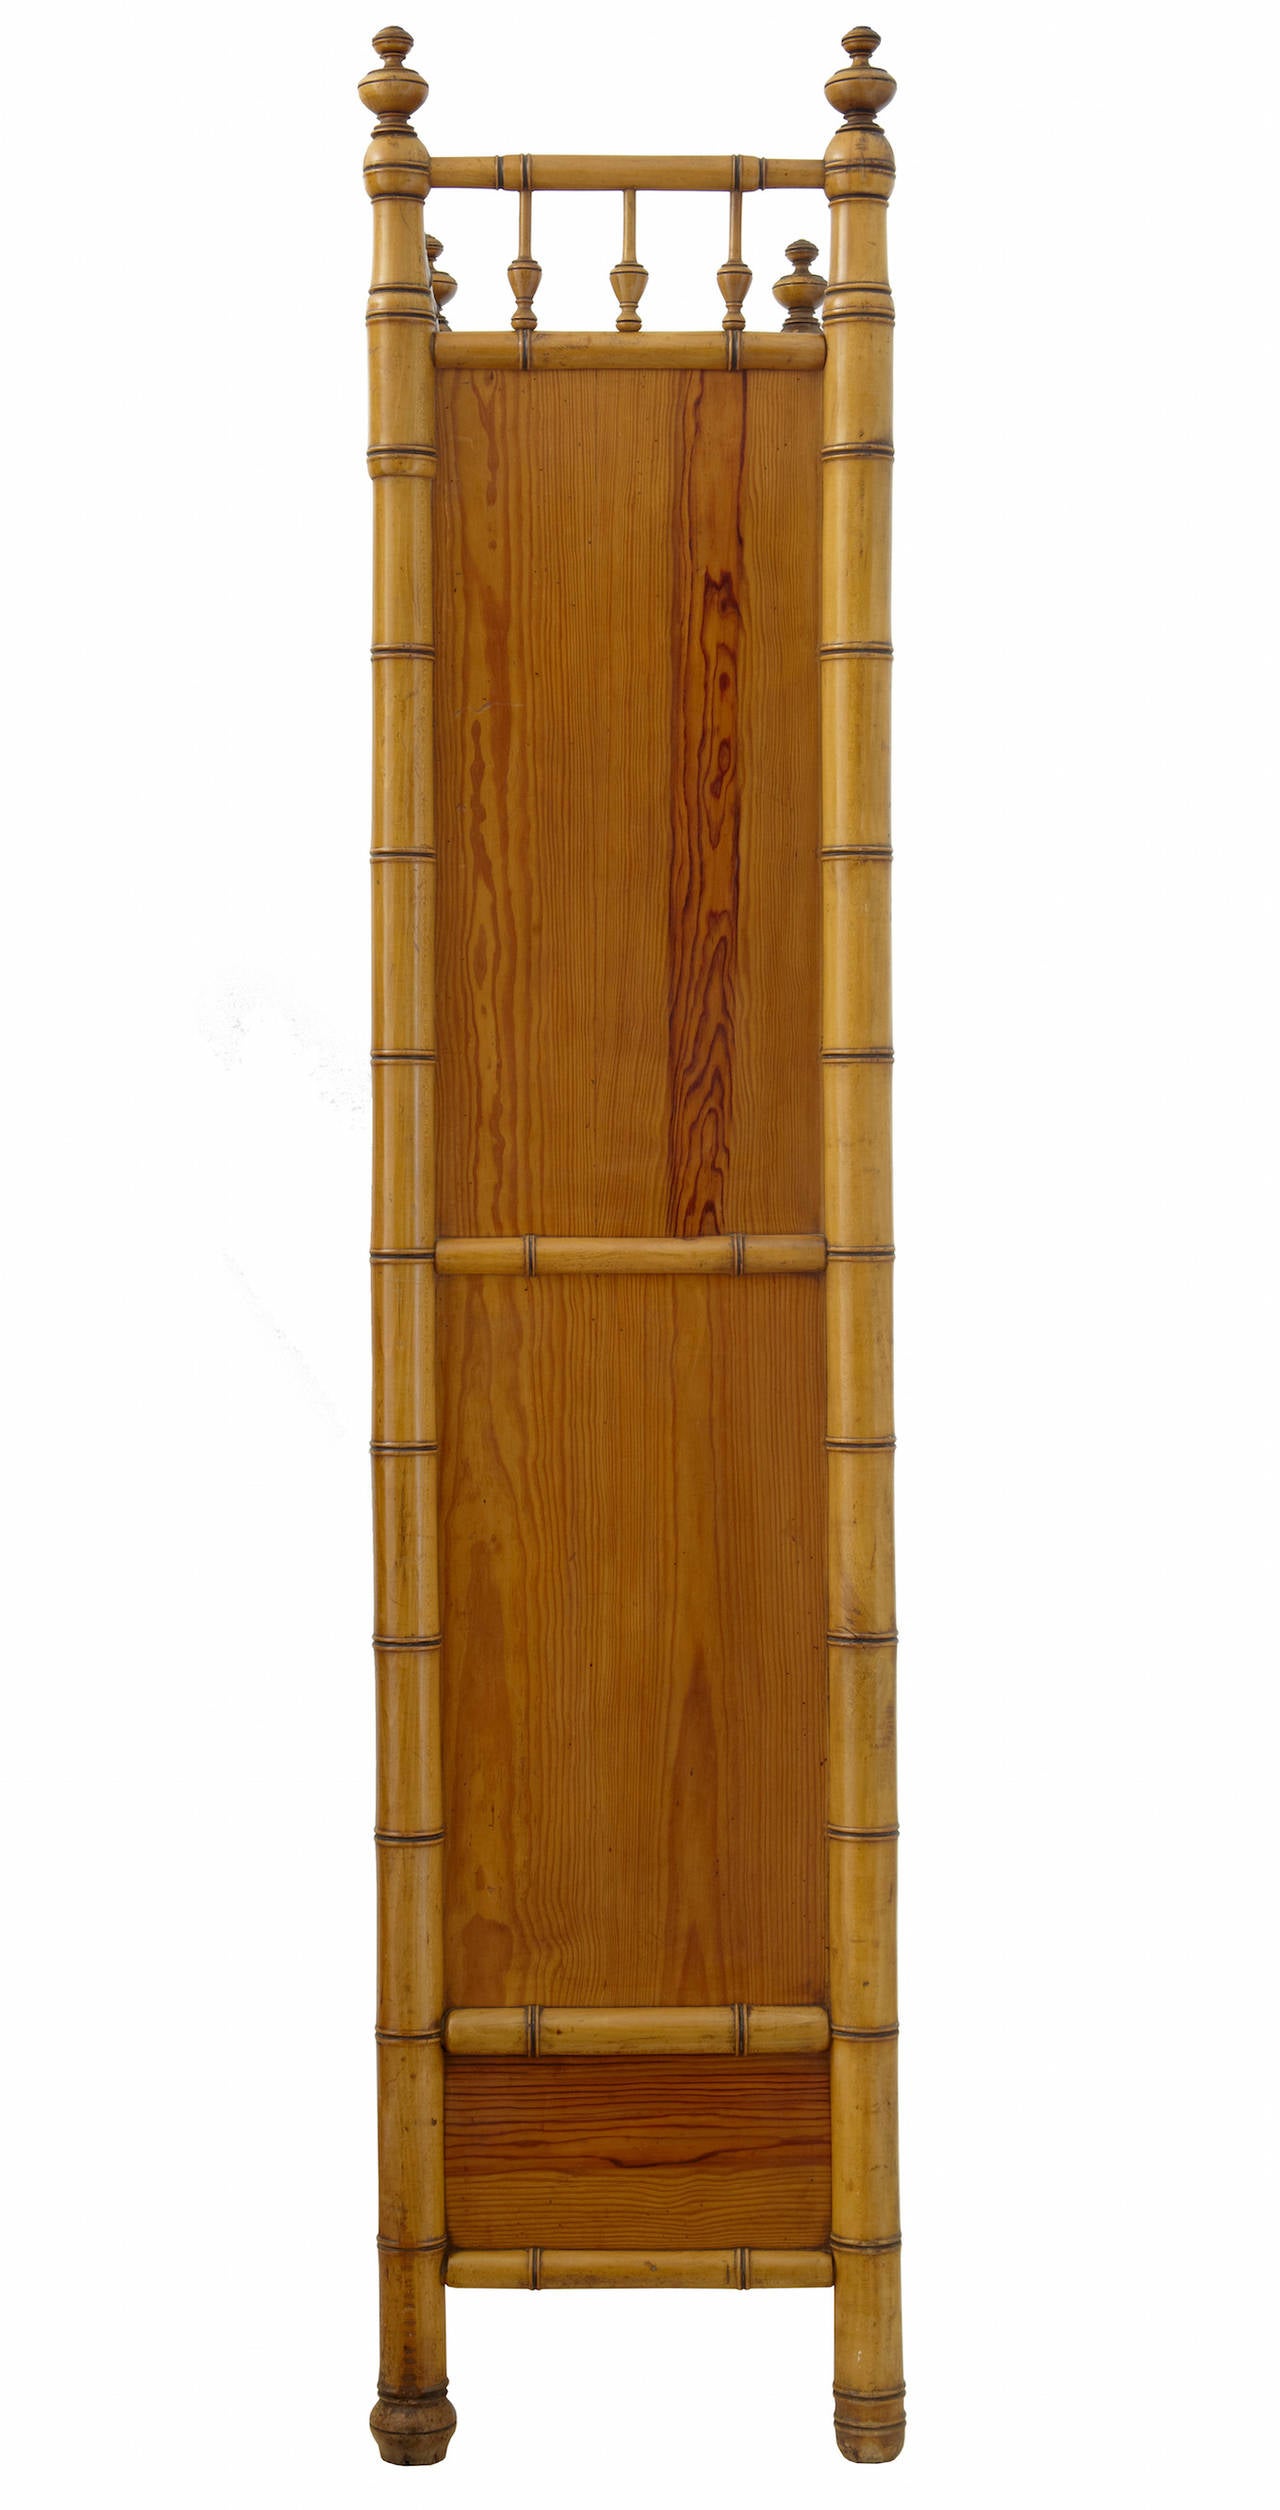 Aesthetic Movement 19th Century French Carved Faux Bamboo Pine Wardrobe Cupboard